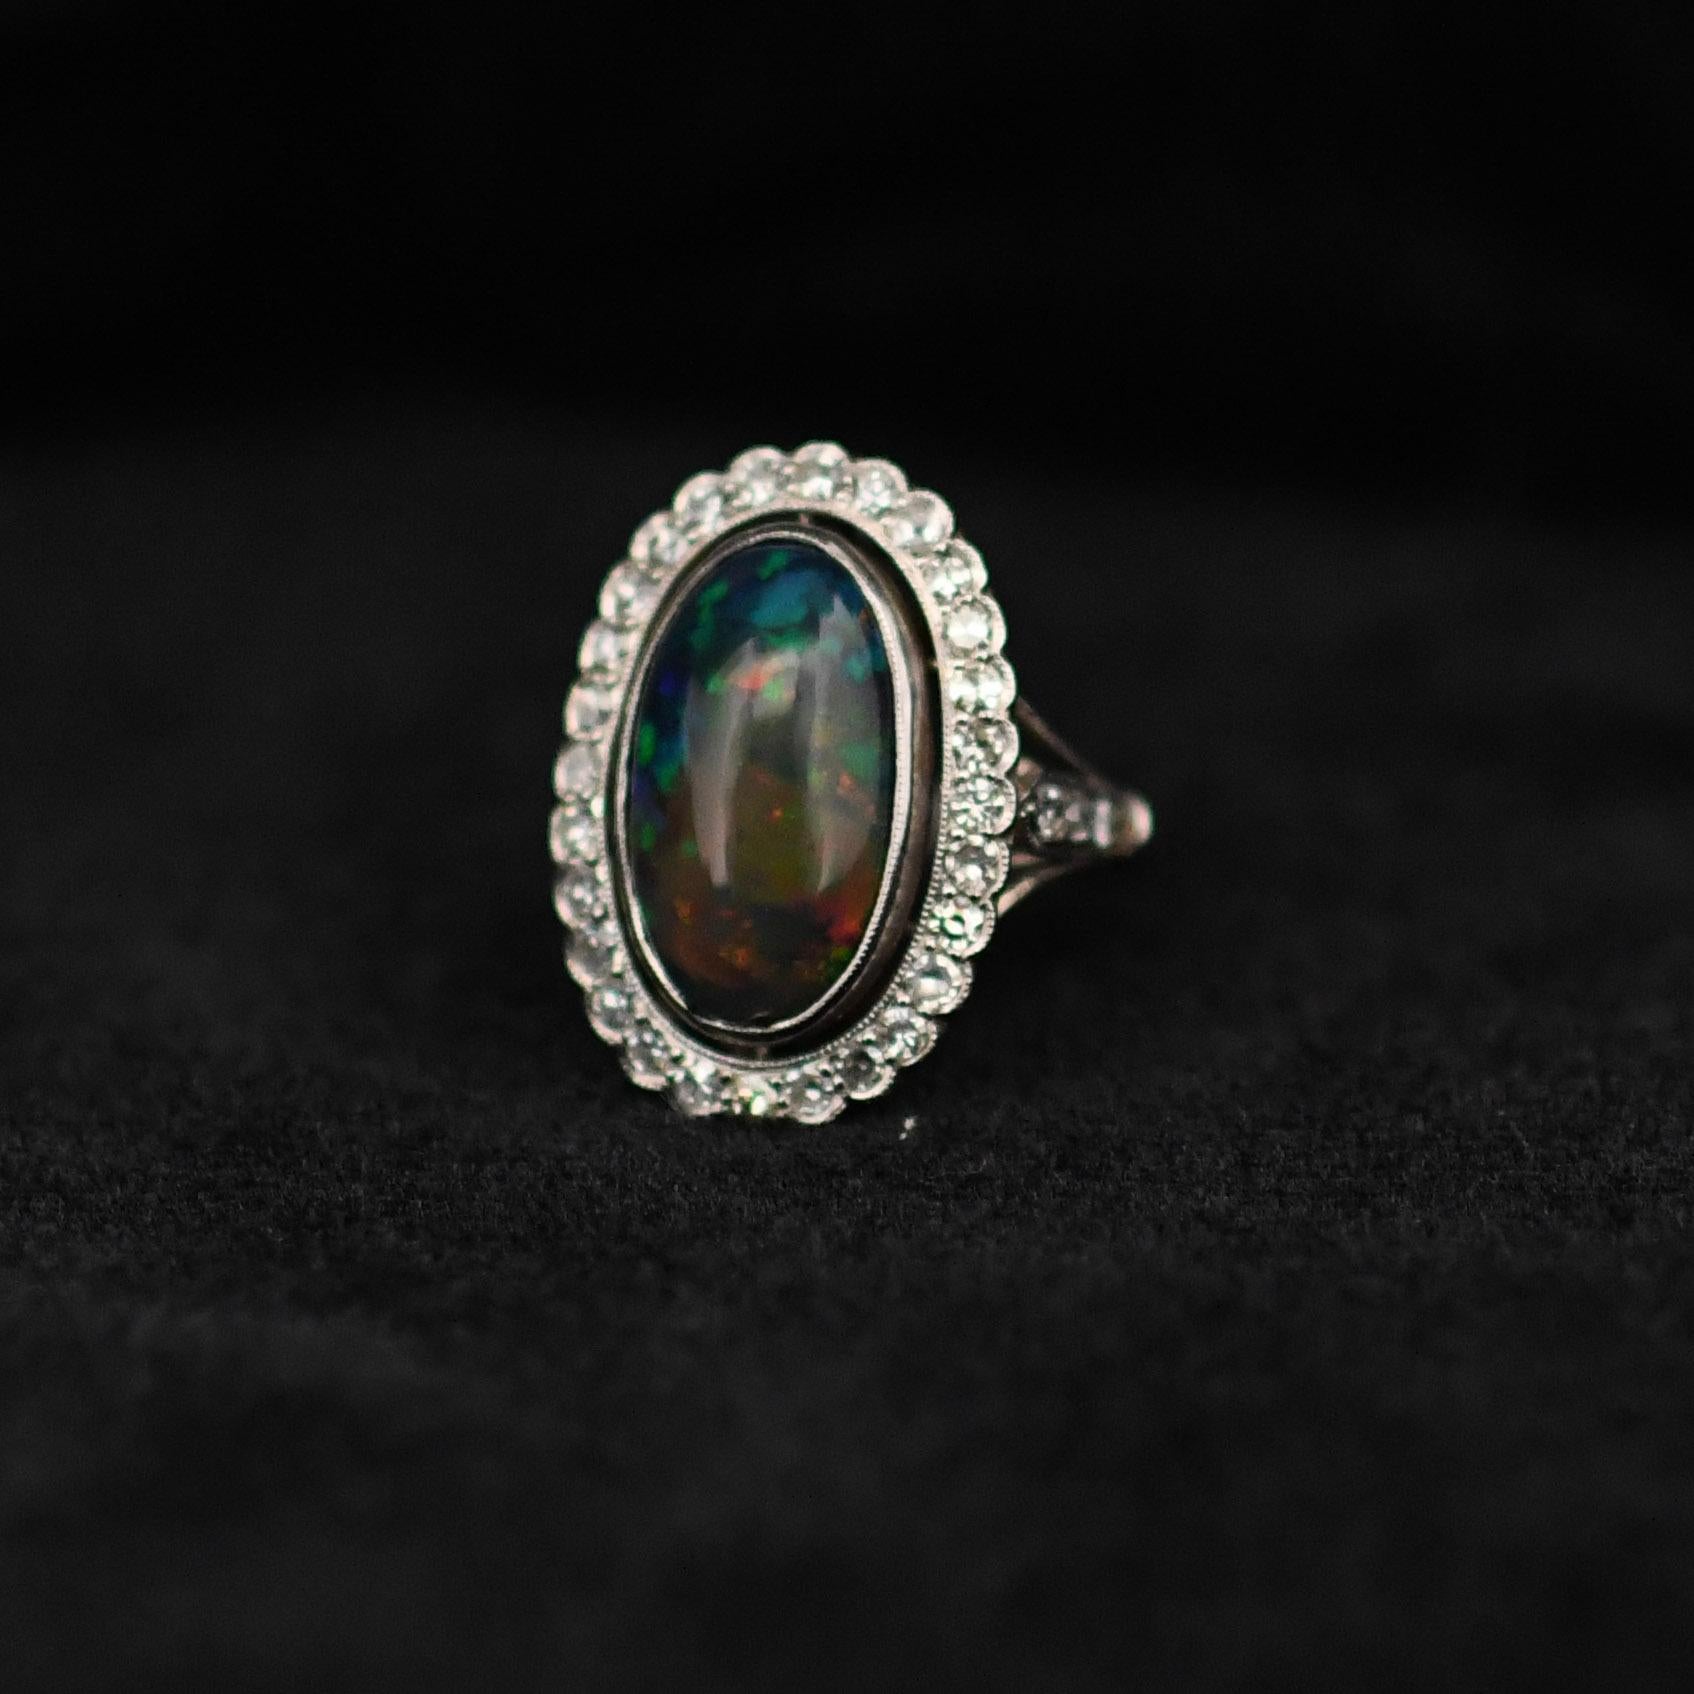 Prepare to be captivated by the exquisite beauty of this Edwardian Opal Cabochon Ring, showcasing a stunning 6.19-carat opal with a mesmerizing harlequin pattern. Handcrafted in platinum, this ring boasts intricate details, including a handmade